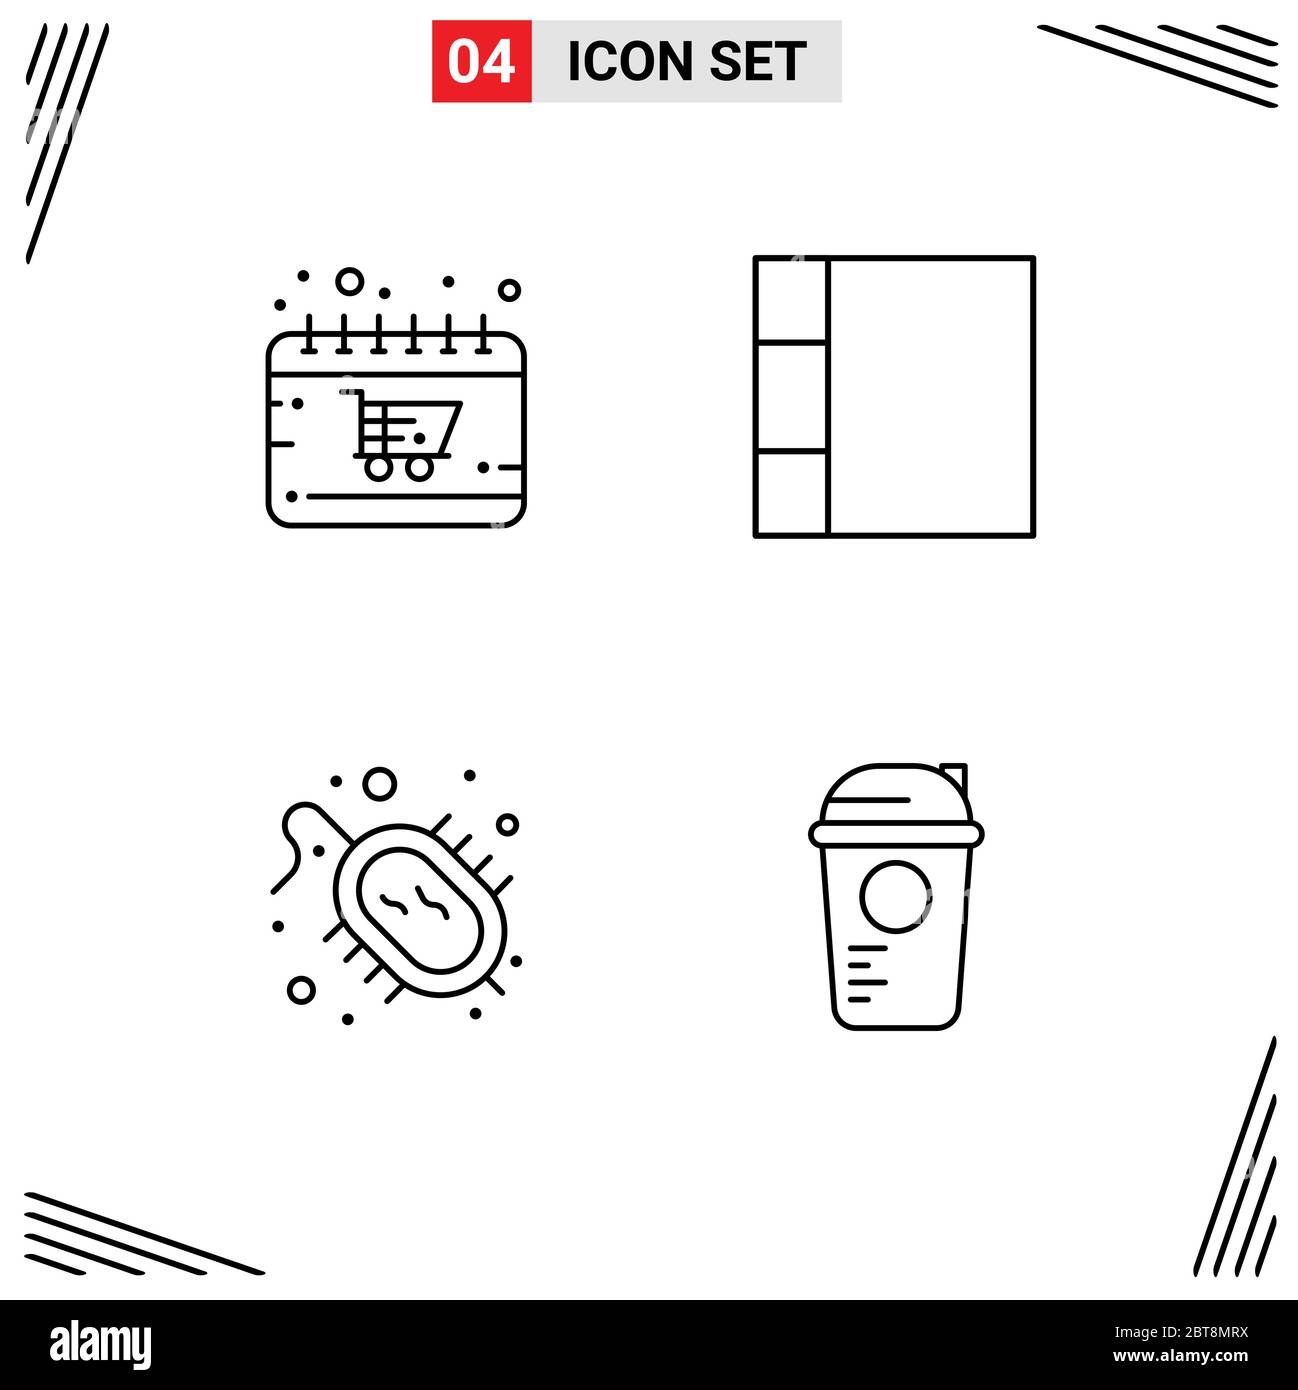 Set of 4 Modern UI Icons Symbols Signs for vacuum eye cable